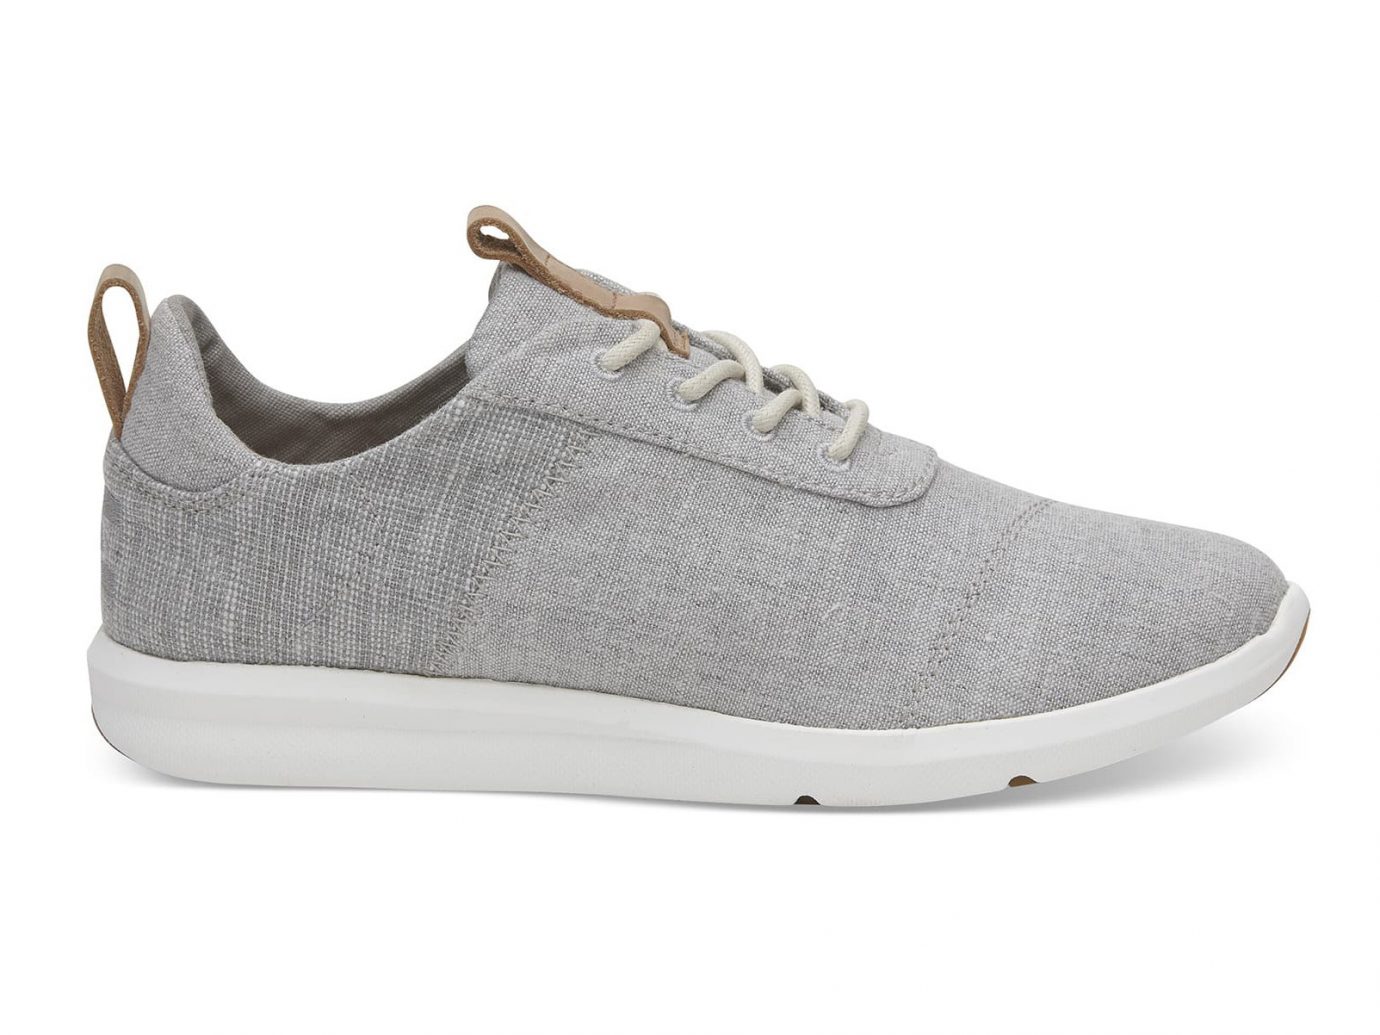 TOMS Drizzle Grey Chambray Mix Women's Cabrillo Sneakers